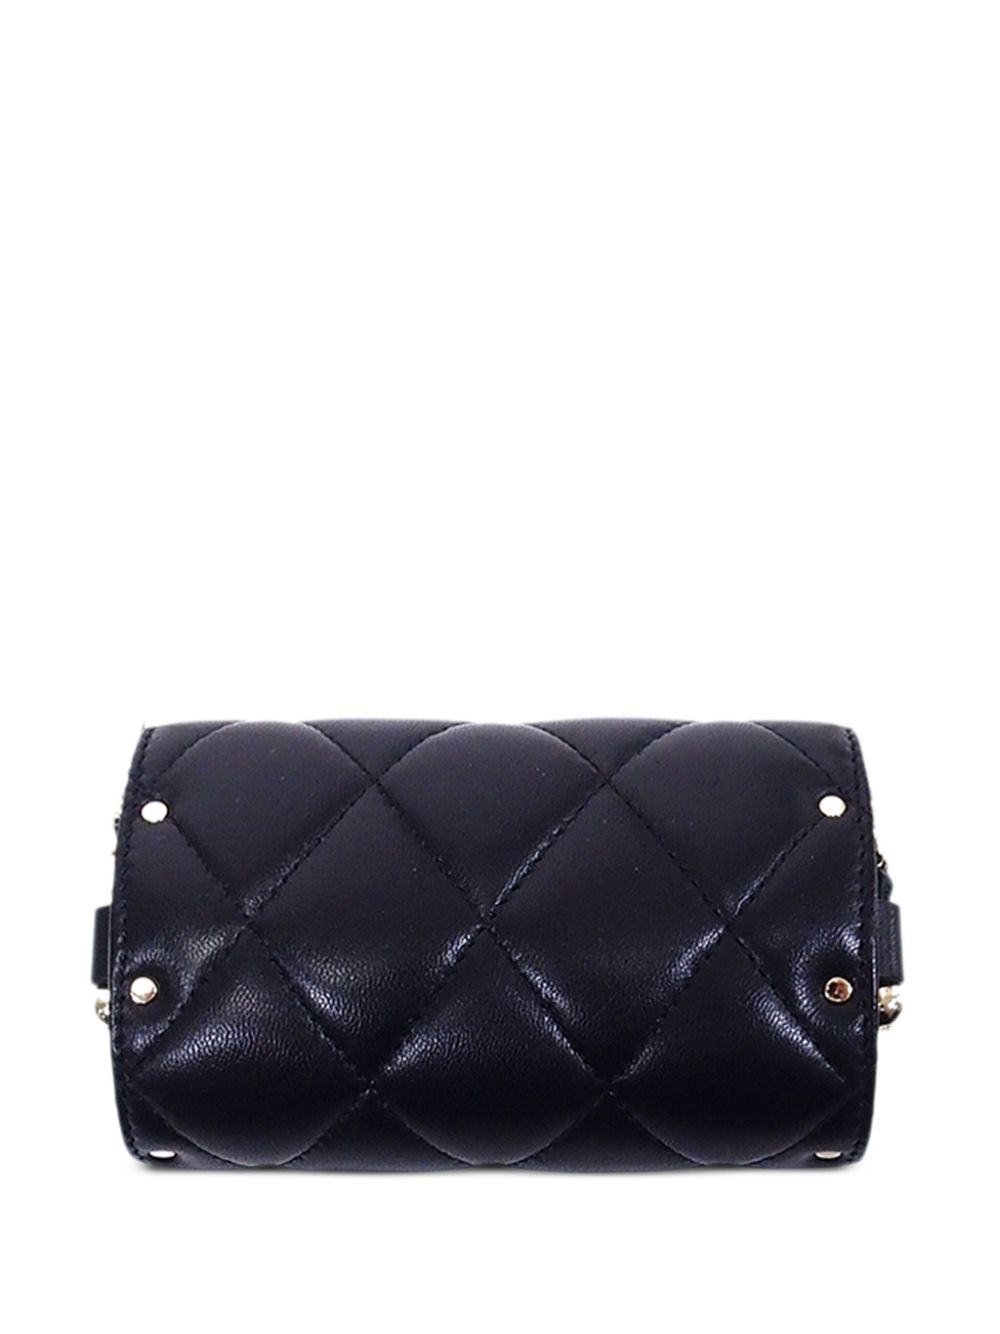 CHANEL Pre-Owned CC diamond-quilted crossbody bag - Zwart